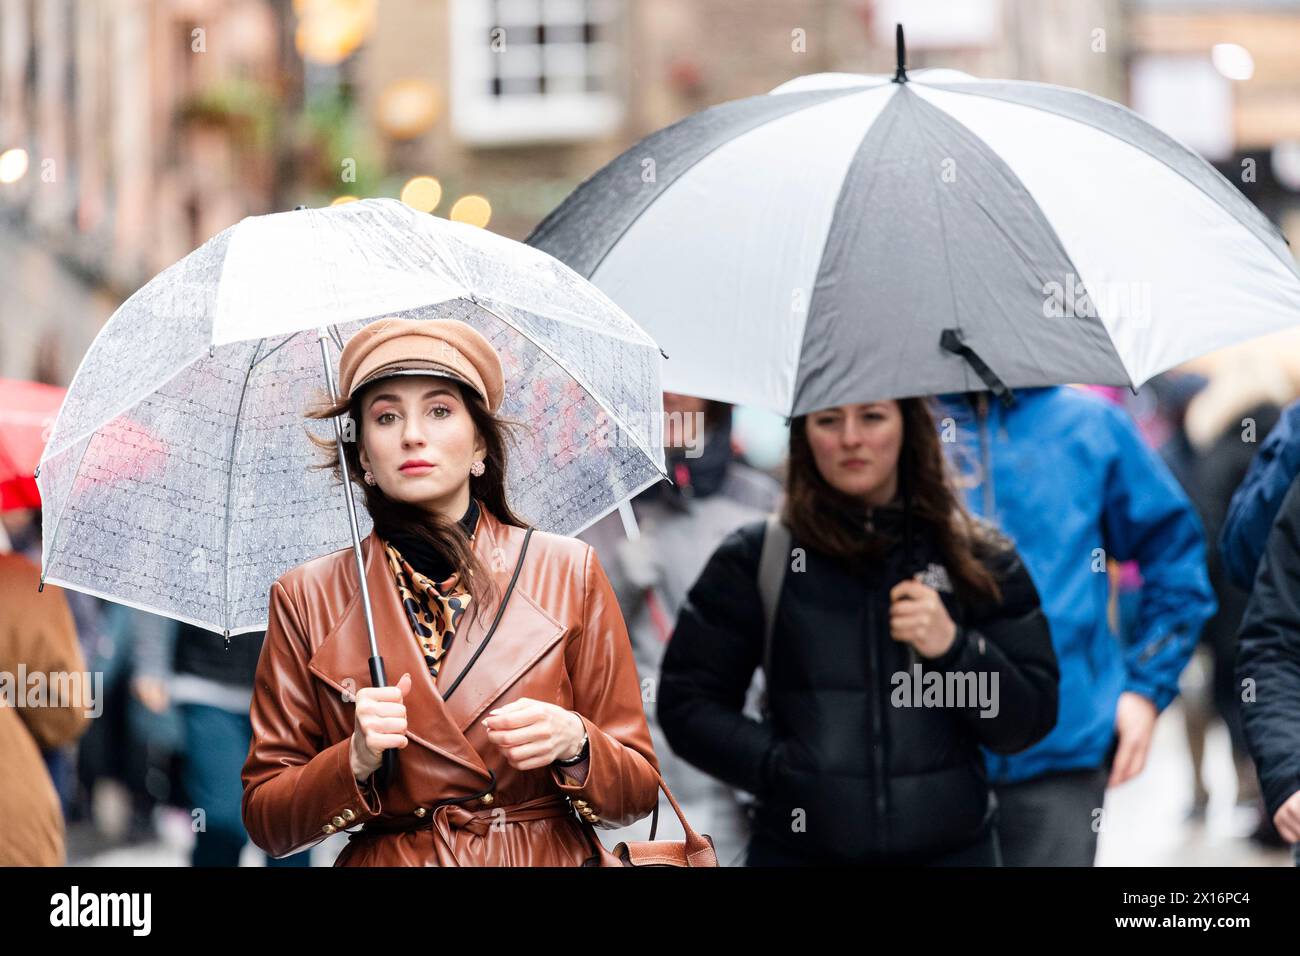 Public scenes in Edinburgh, as parts of the country is under a Met weather yellow warning for rainfall after Storm Kathleen.  Credit: Euan Cherry Stock Photo